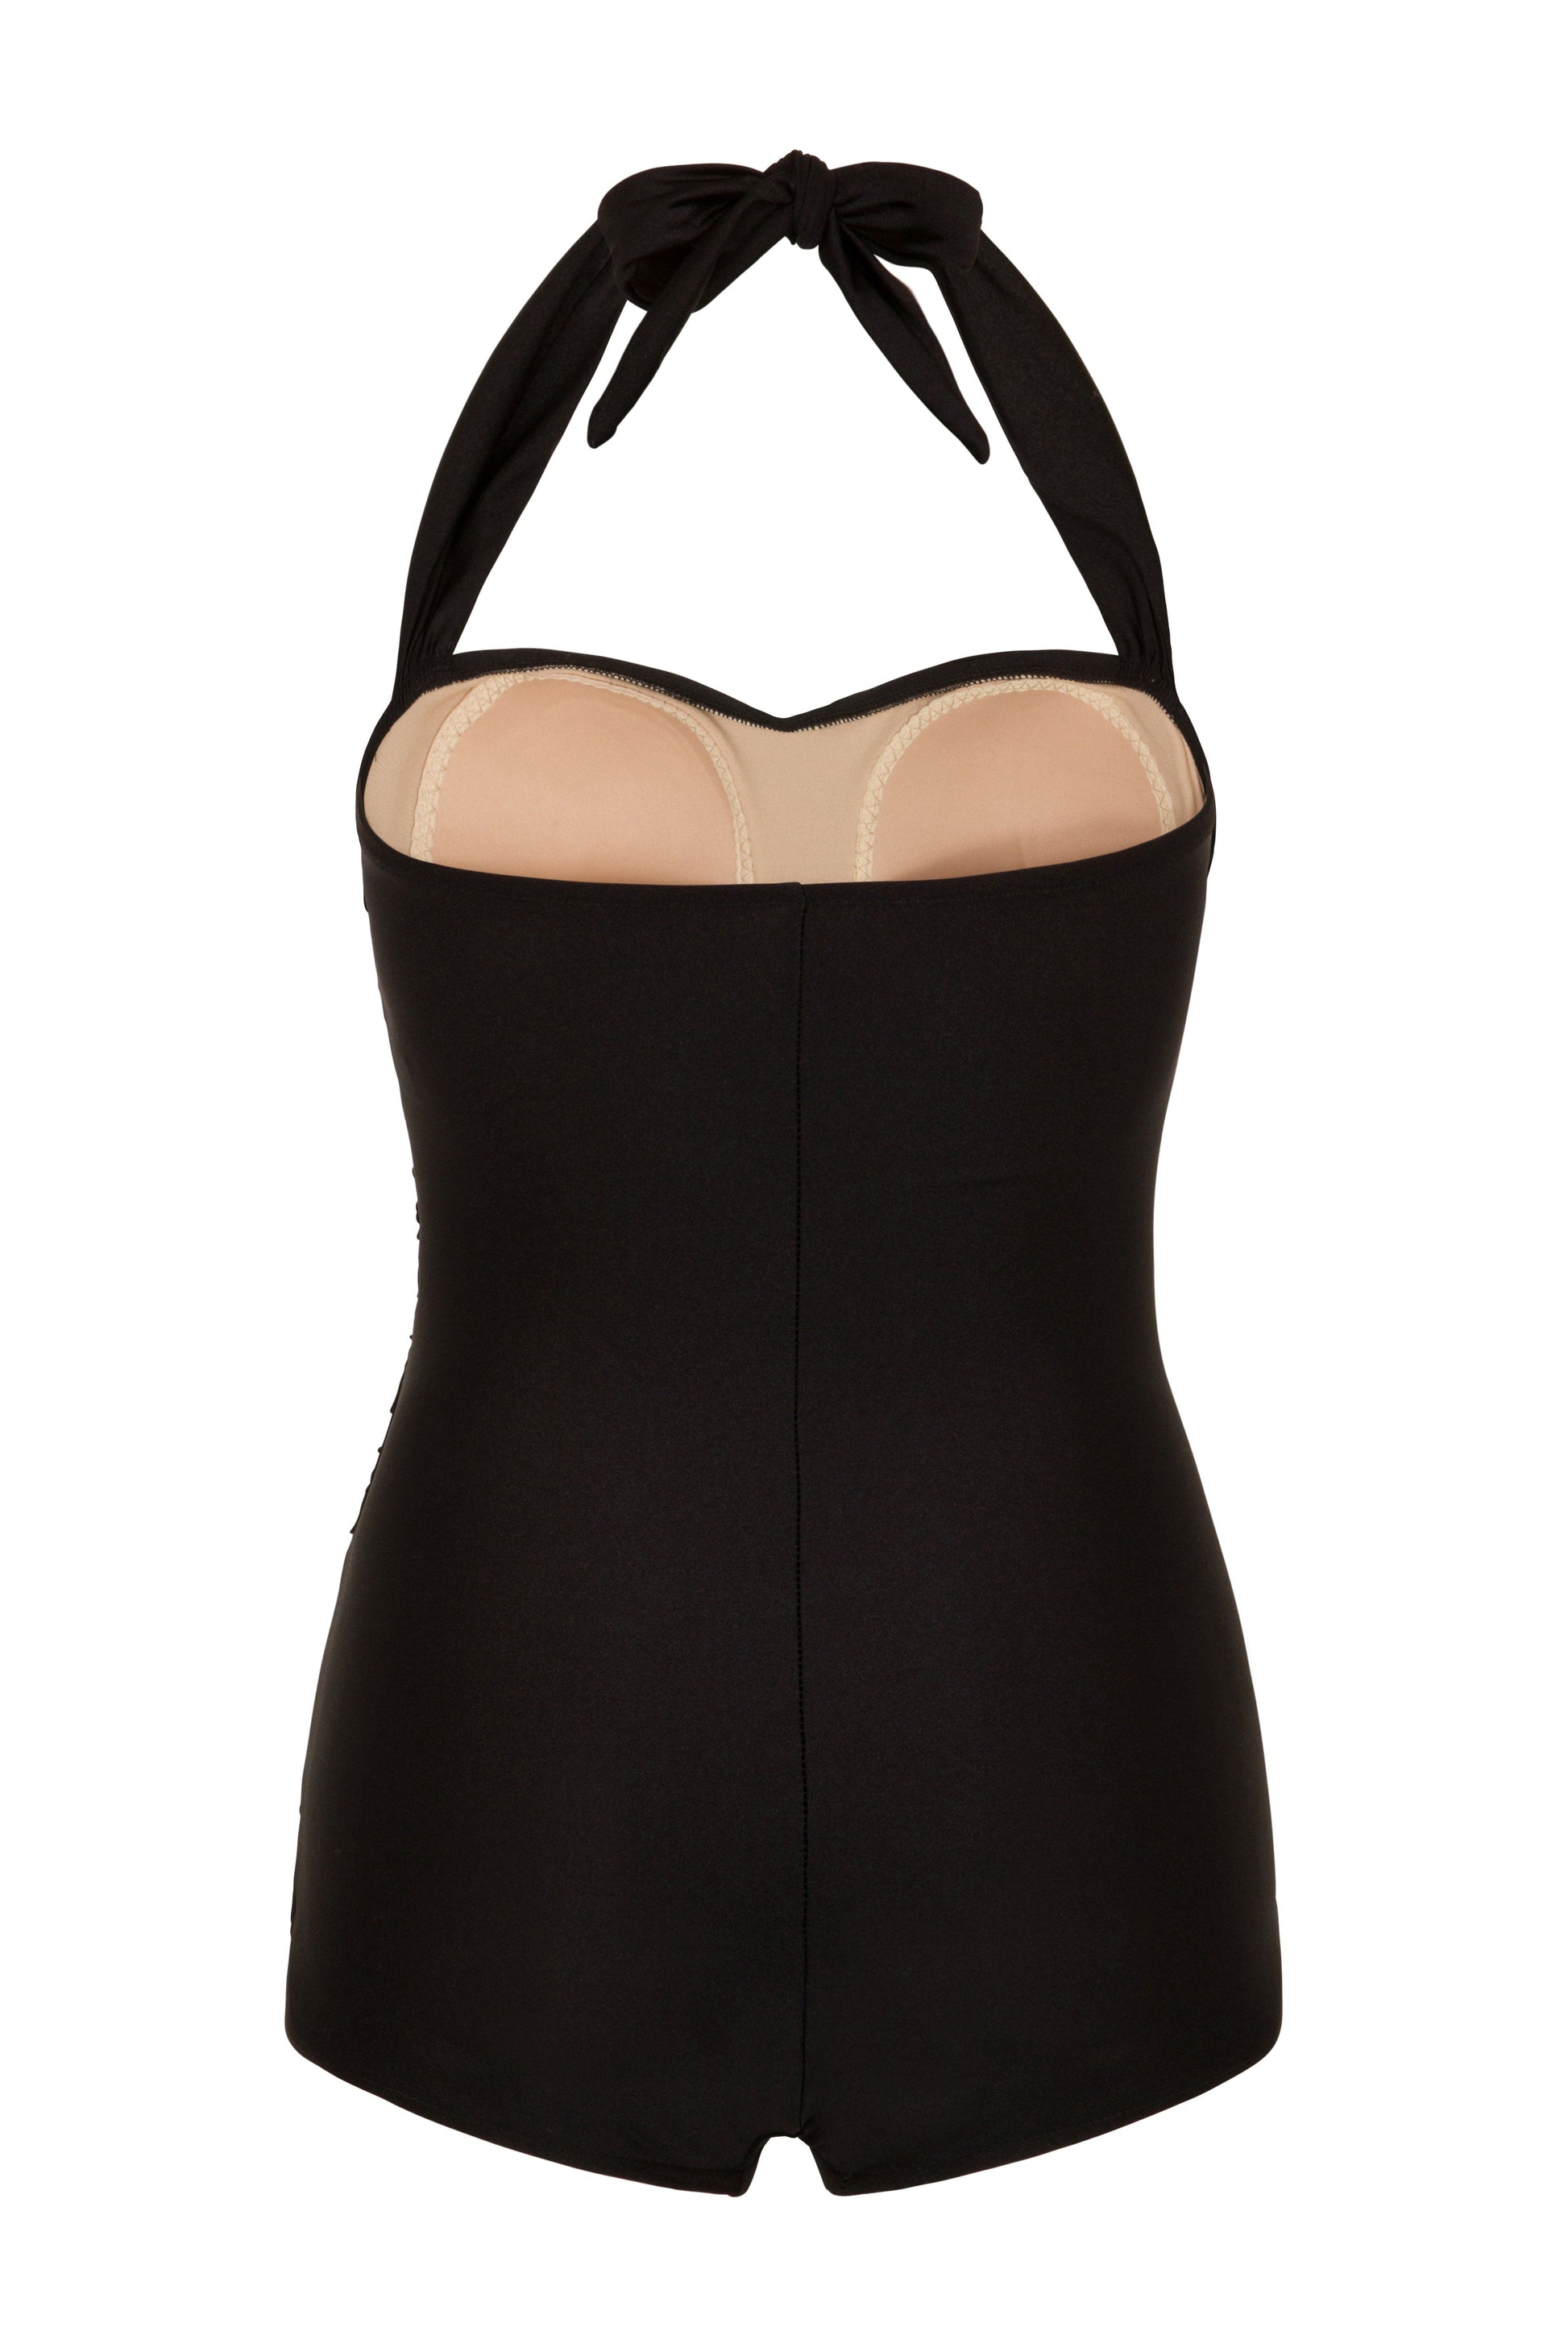 BettyliciousUK Esther Williams Black 1950's Style Swimsuit with Tummy Control